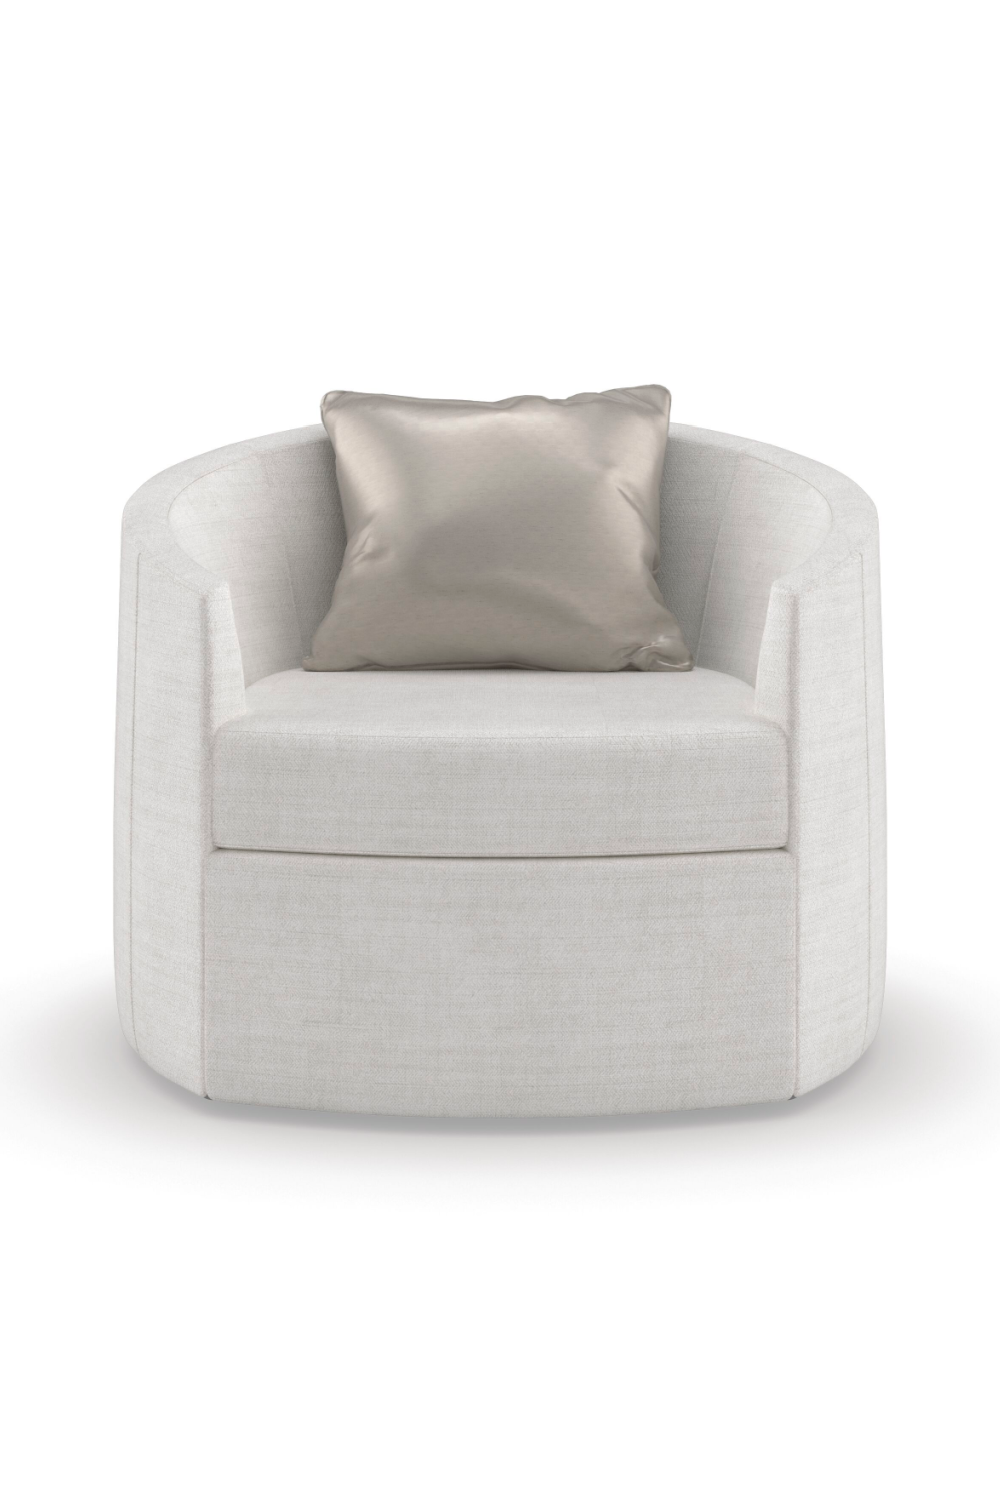 Gray Rounded Swivel Chair | Caracole You Complete Me | Oroa.com